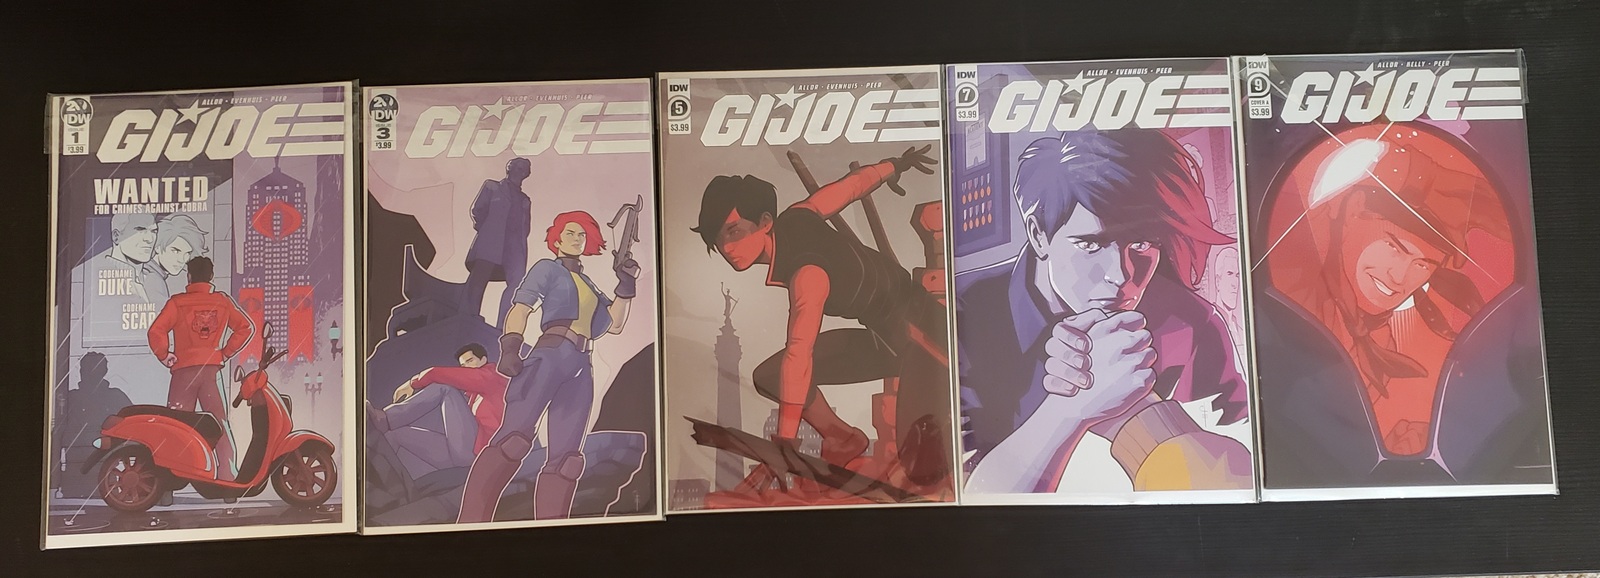 Primary image for IDW: G. I. JOE # 1-10 FULL RUN + G.I.JOE: CASTLE FALL ONE-SHOT SPECIAL